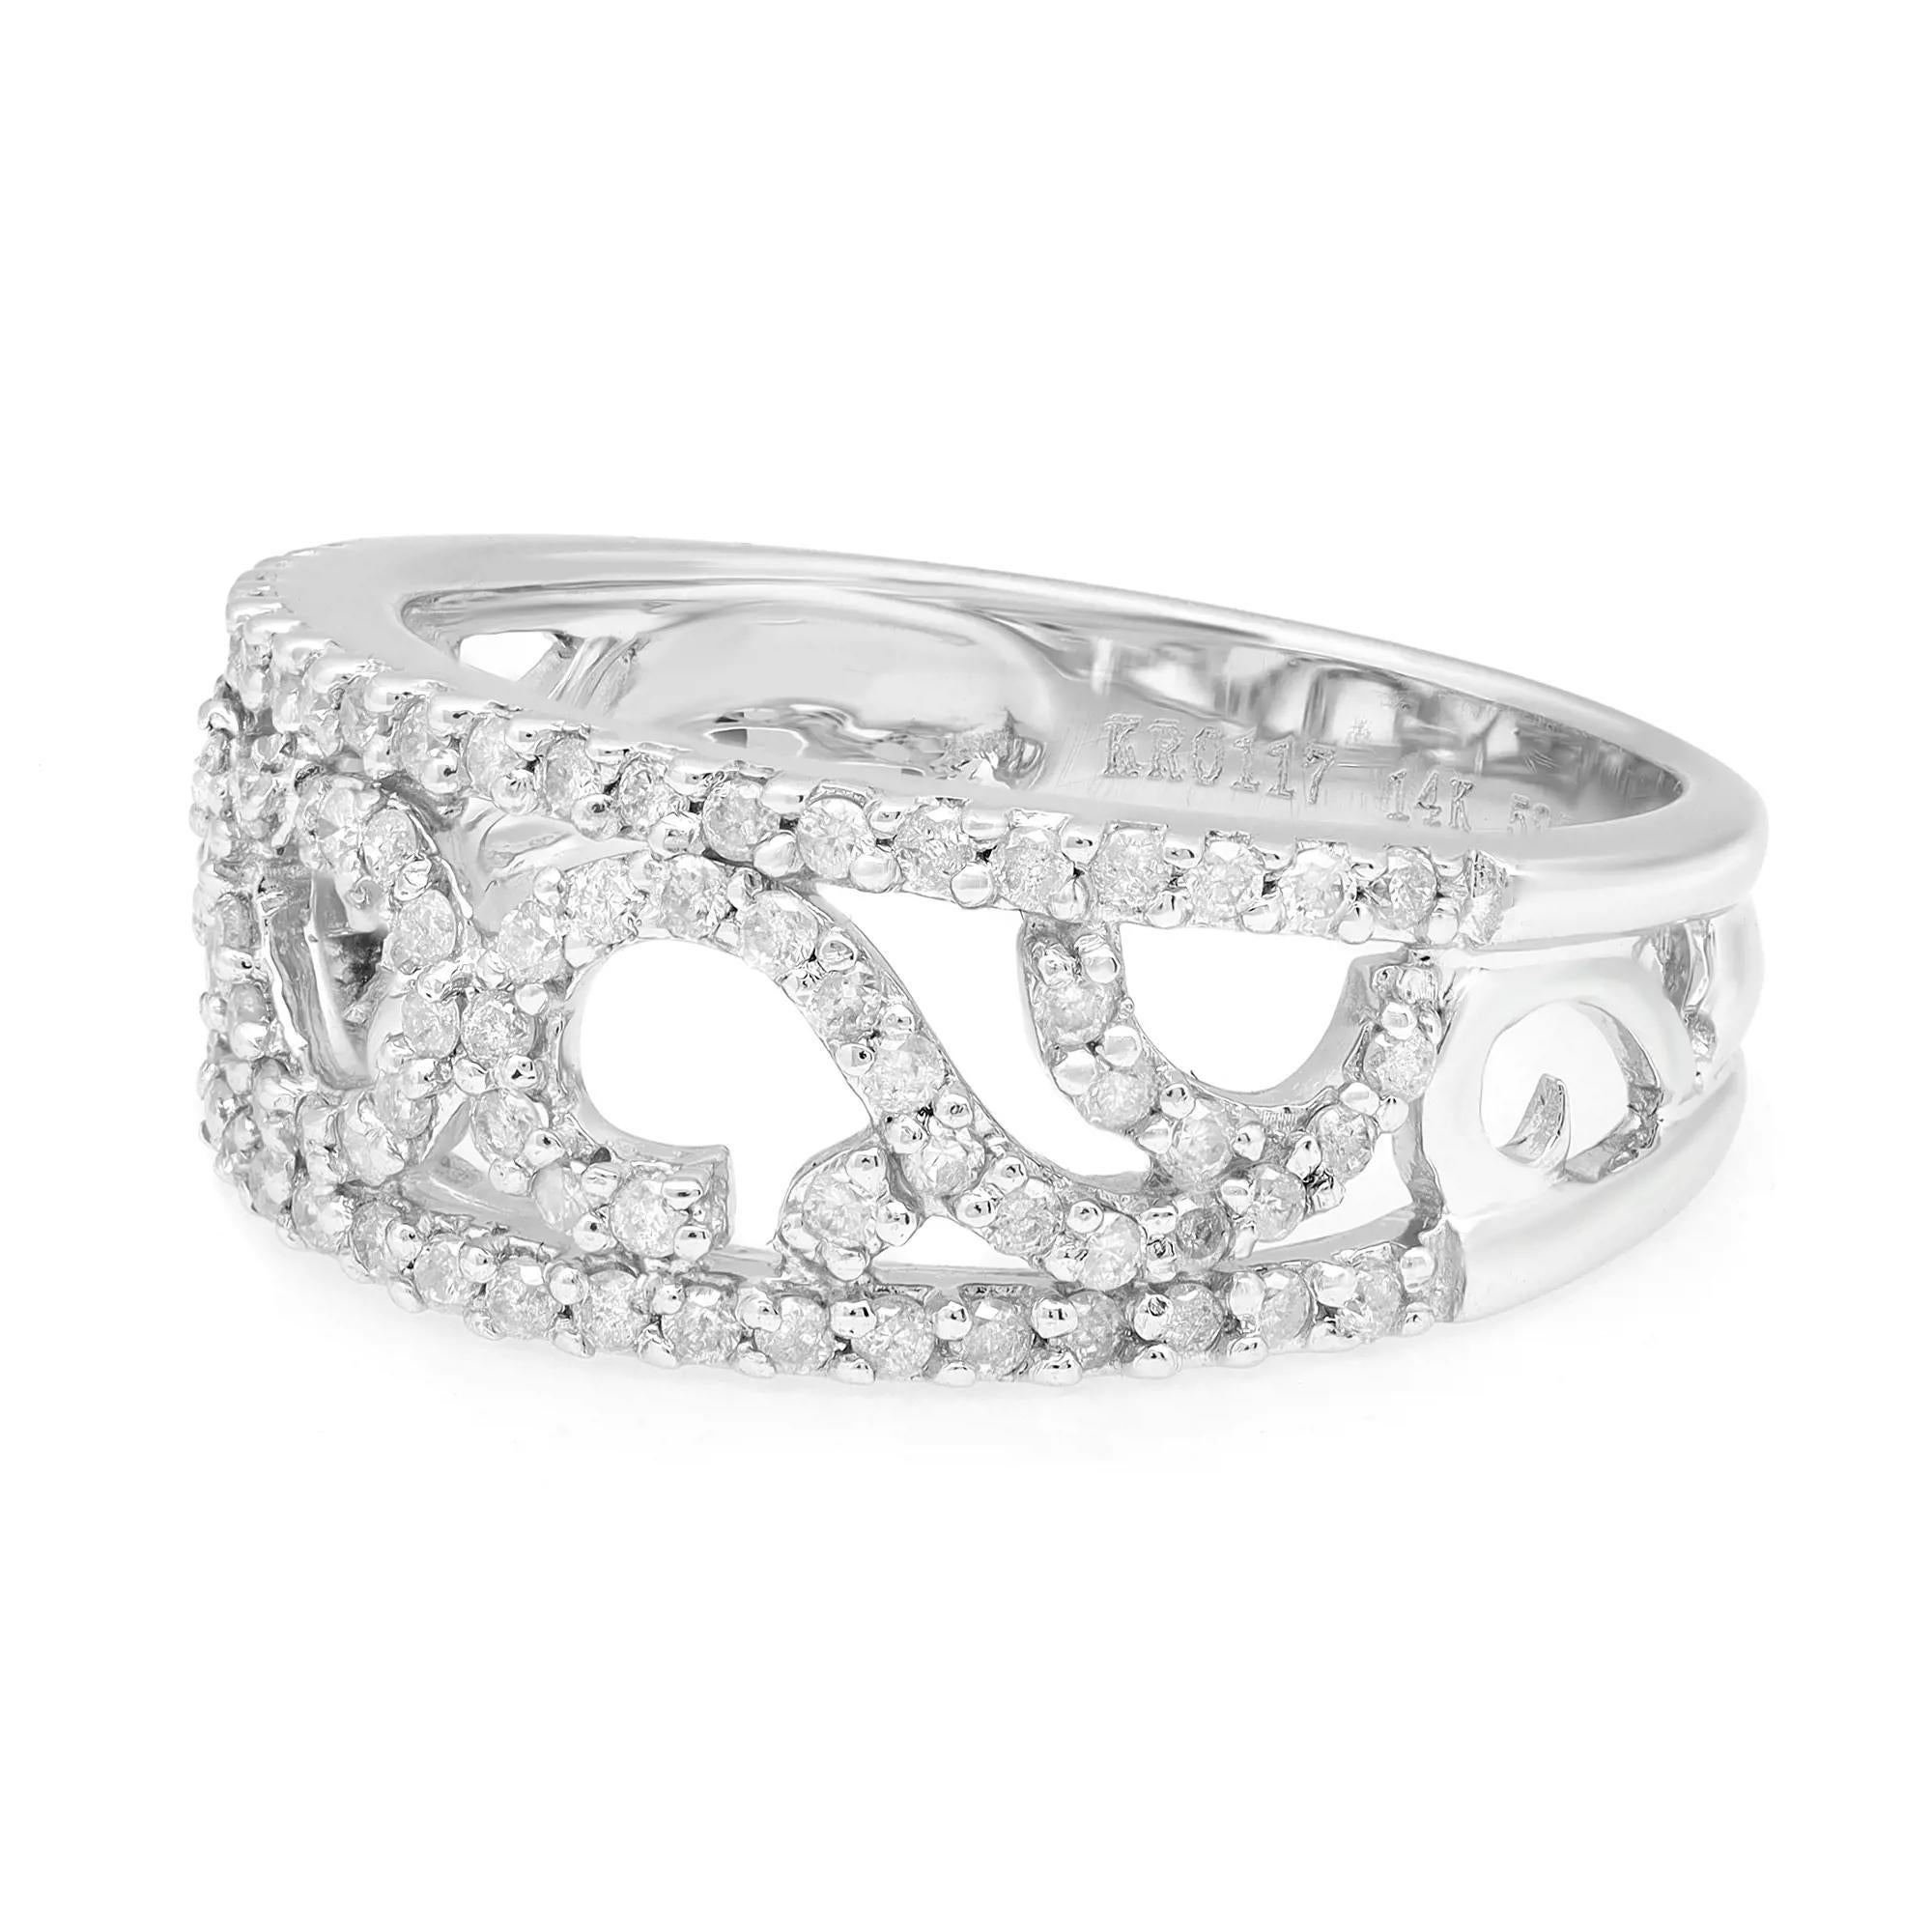 Modern ladies wide band ring crafted in 14k white gold. This ring features round cut diamonds encrusted in prong setting. Total diamond weight: 0.53 carat. Diamond quality: color I and clarity SI1. Ring size: 7.5. Ring width: 8.7mm. Total weight: